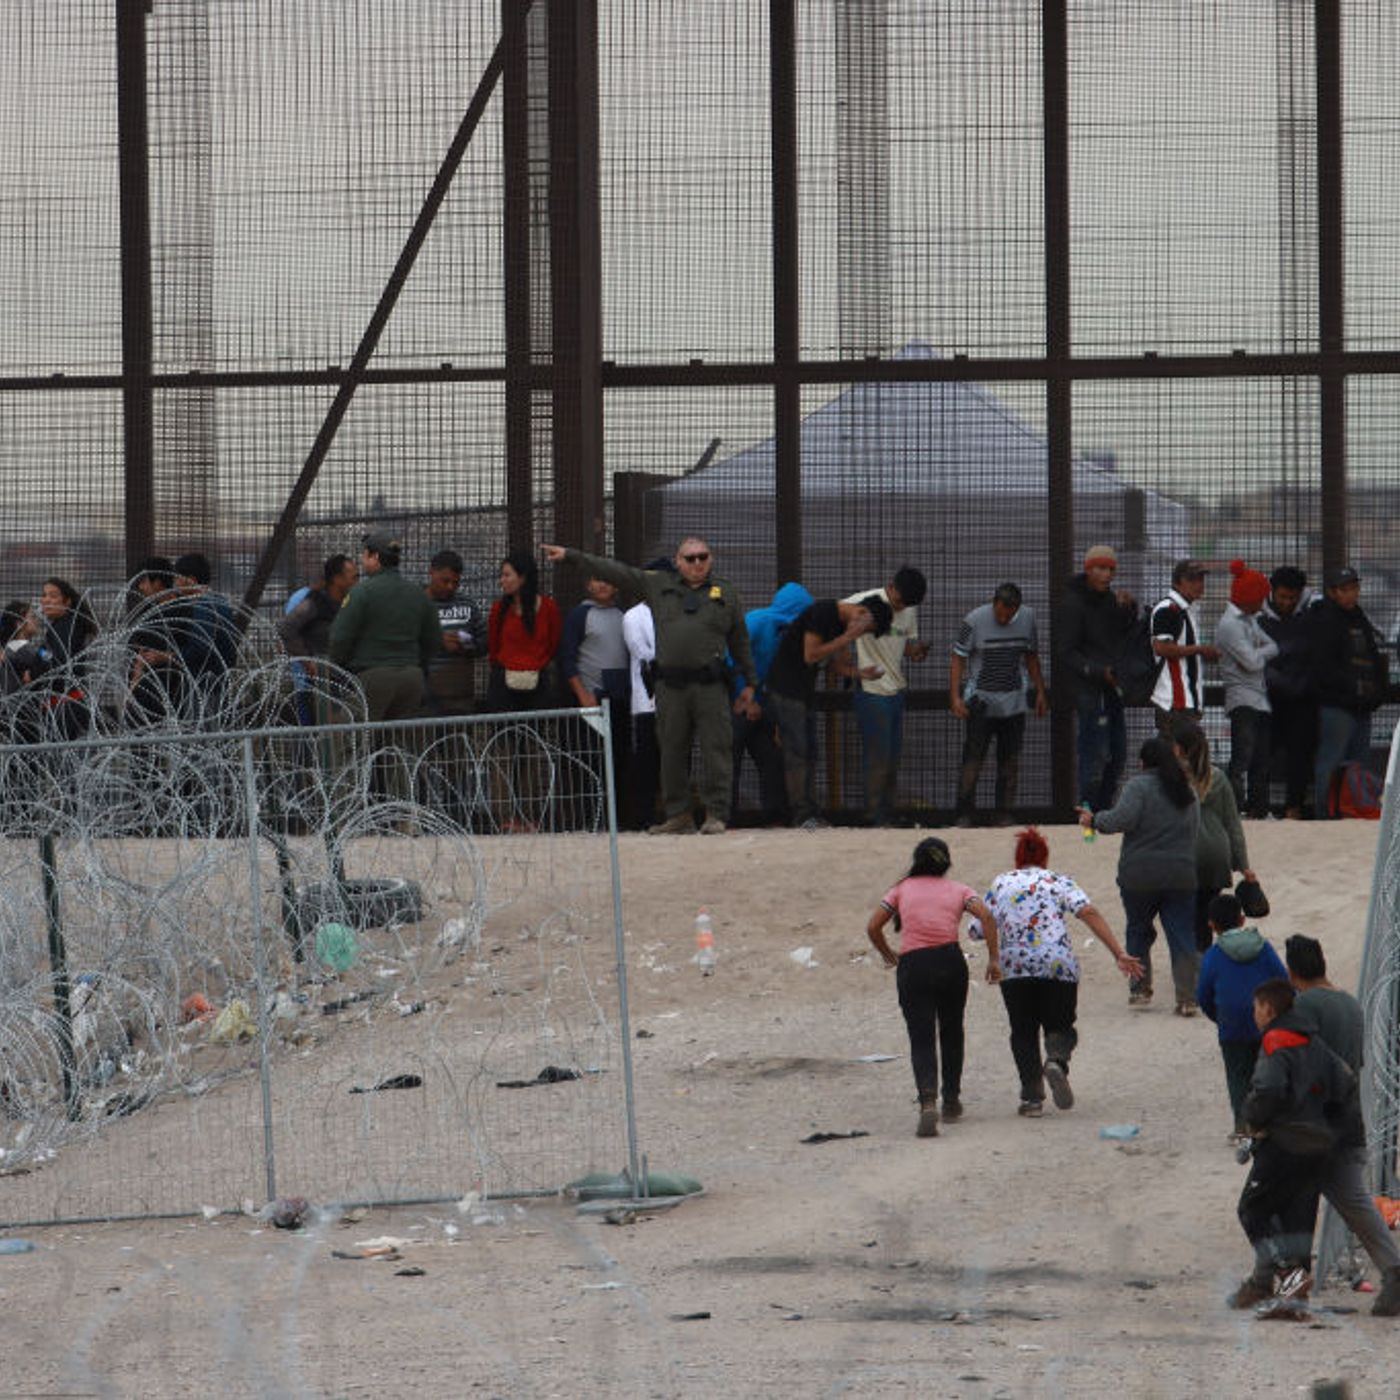 How bad is the border crisis?